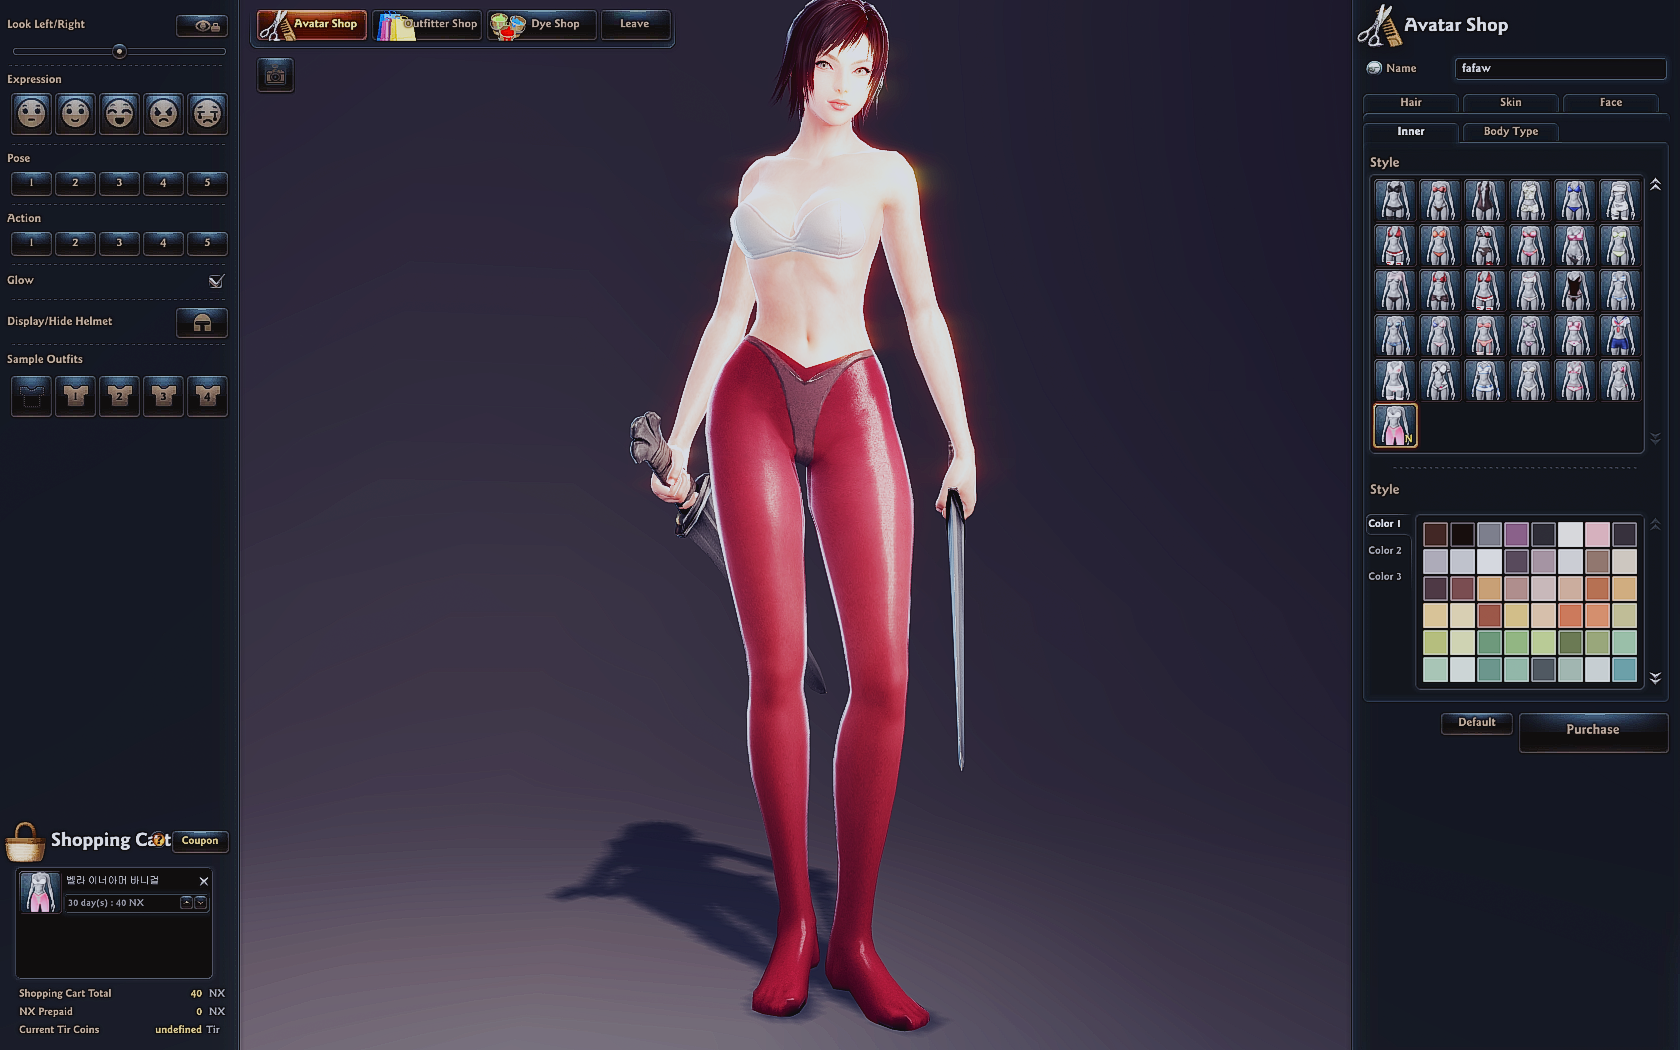 ifbu0qT - [Release] Bunny suit for female characters - RaGEZONE Forums